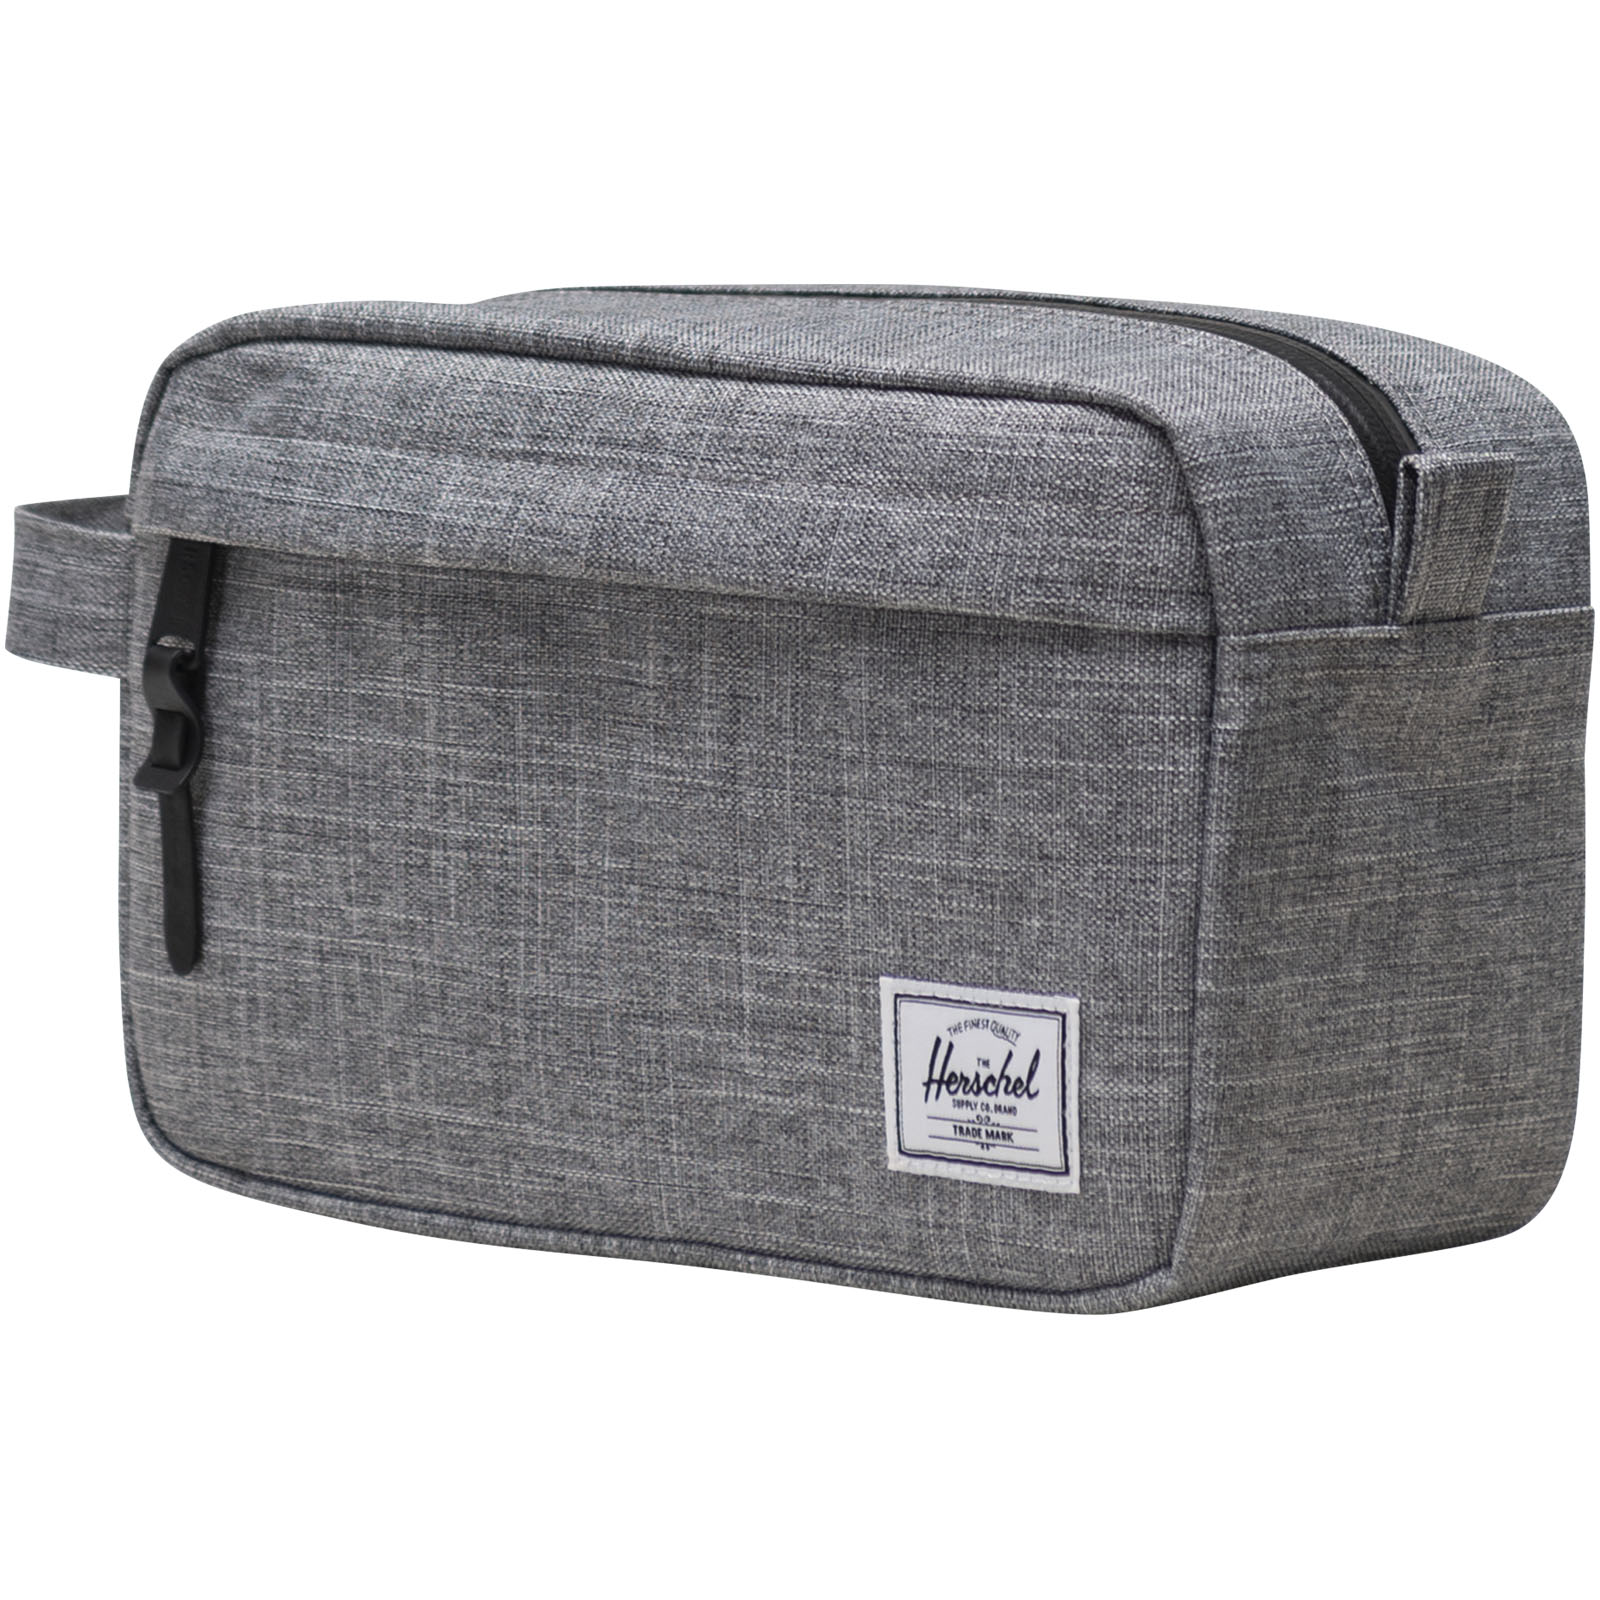 Bags - Herschel Chapter recycled travel kit